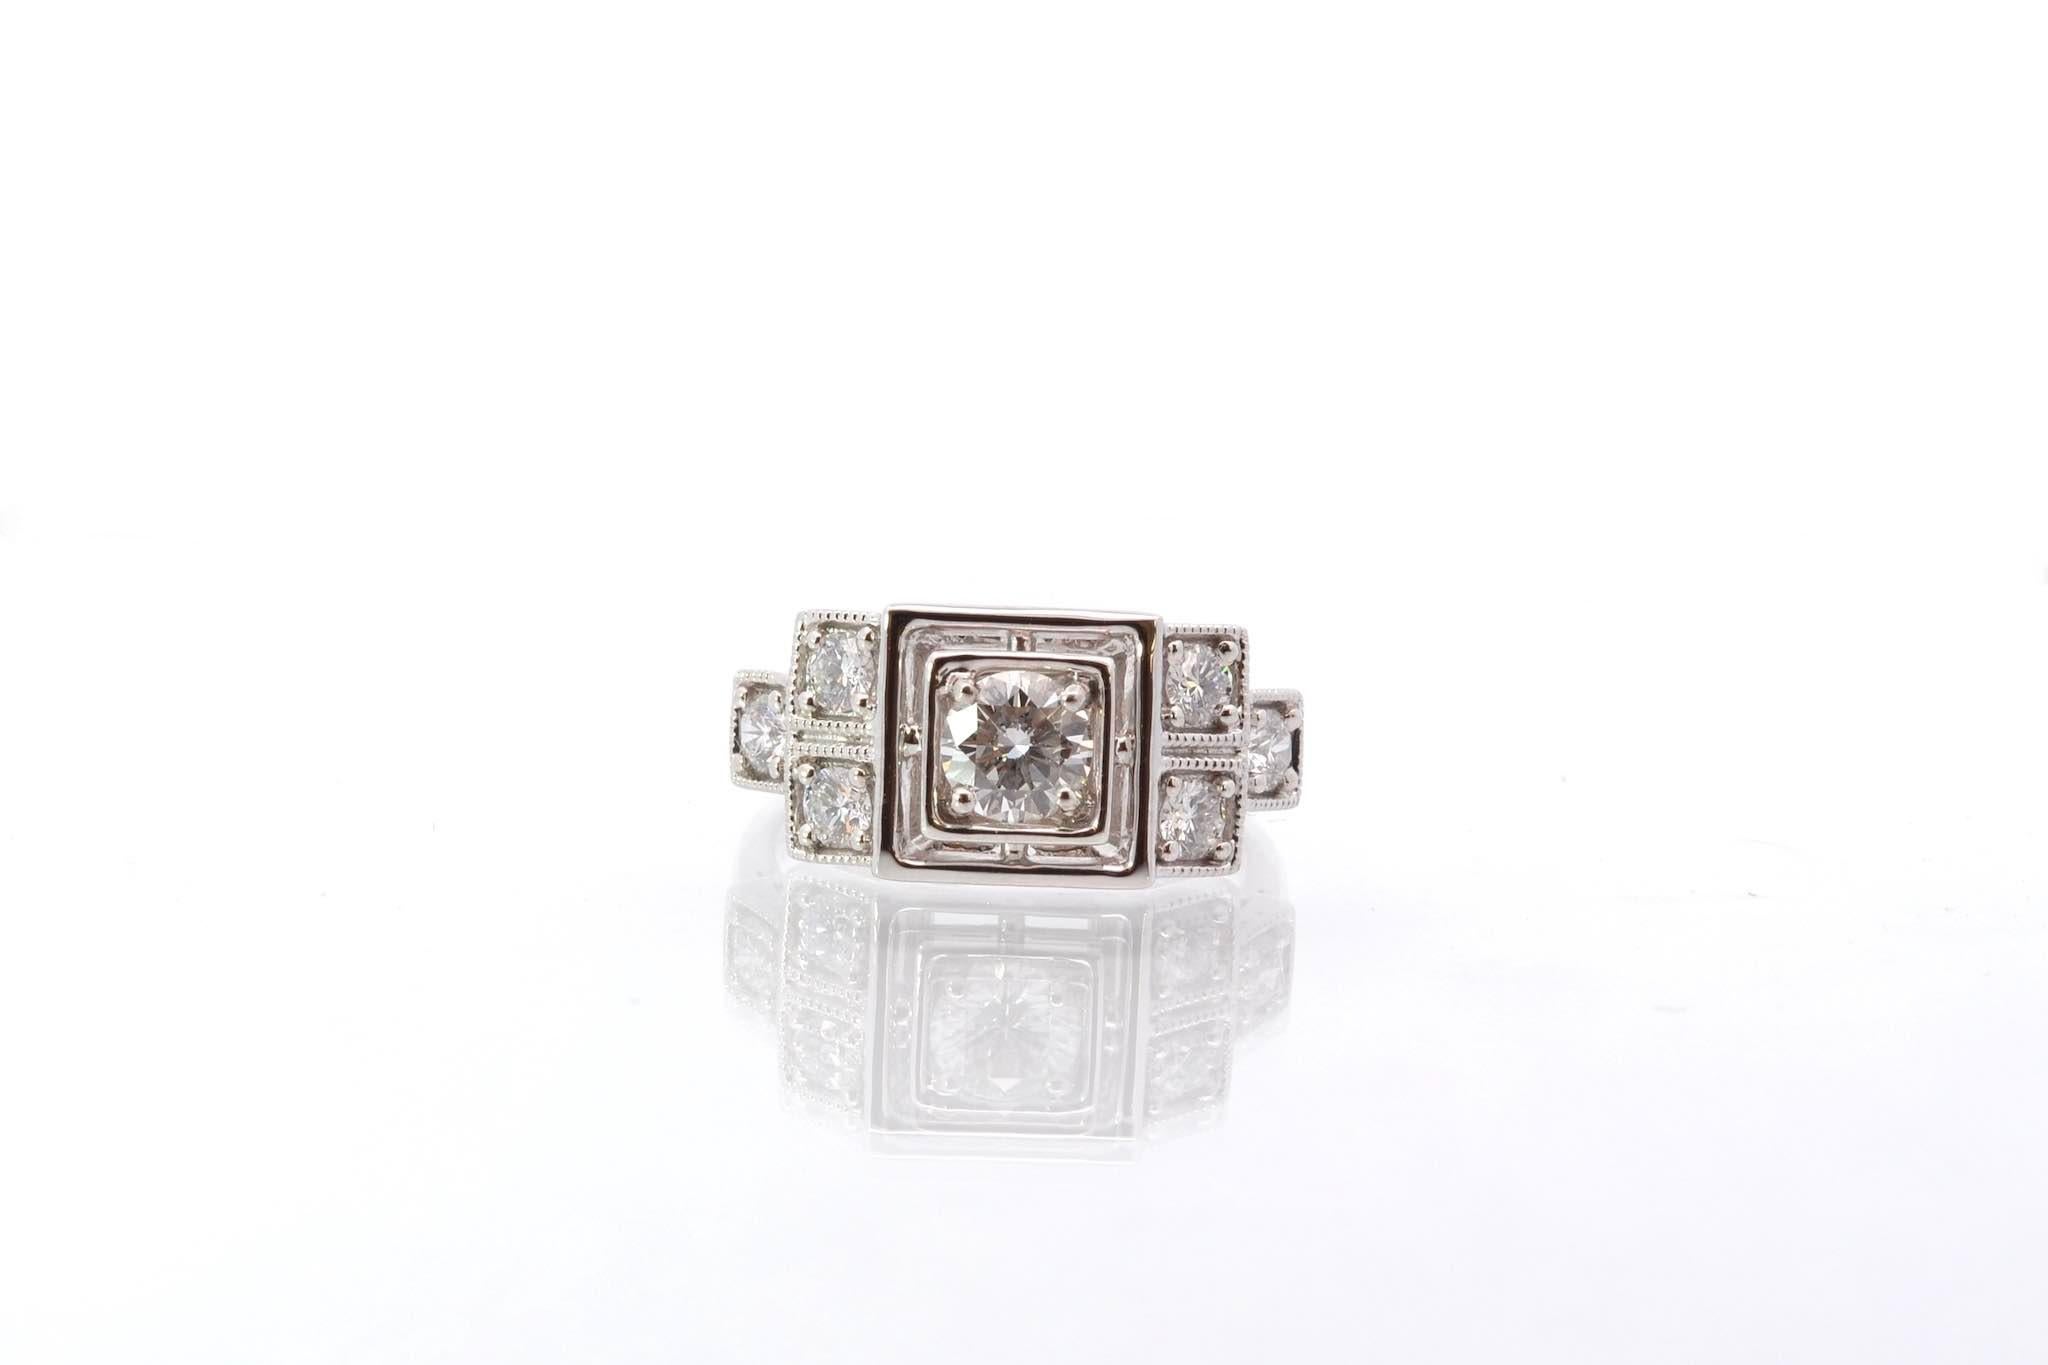 Stones: Central diamond: 0.54 ct, 6 diamonds: 0.52 ct
Material: 18k white gold
Dimensions: 1cm
Weight: 6.4g
Period: Recent vintage art deco style
Size: 54 (free sizing)
Certificate
Ref. : 25570 25559